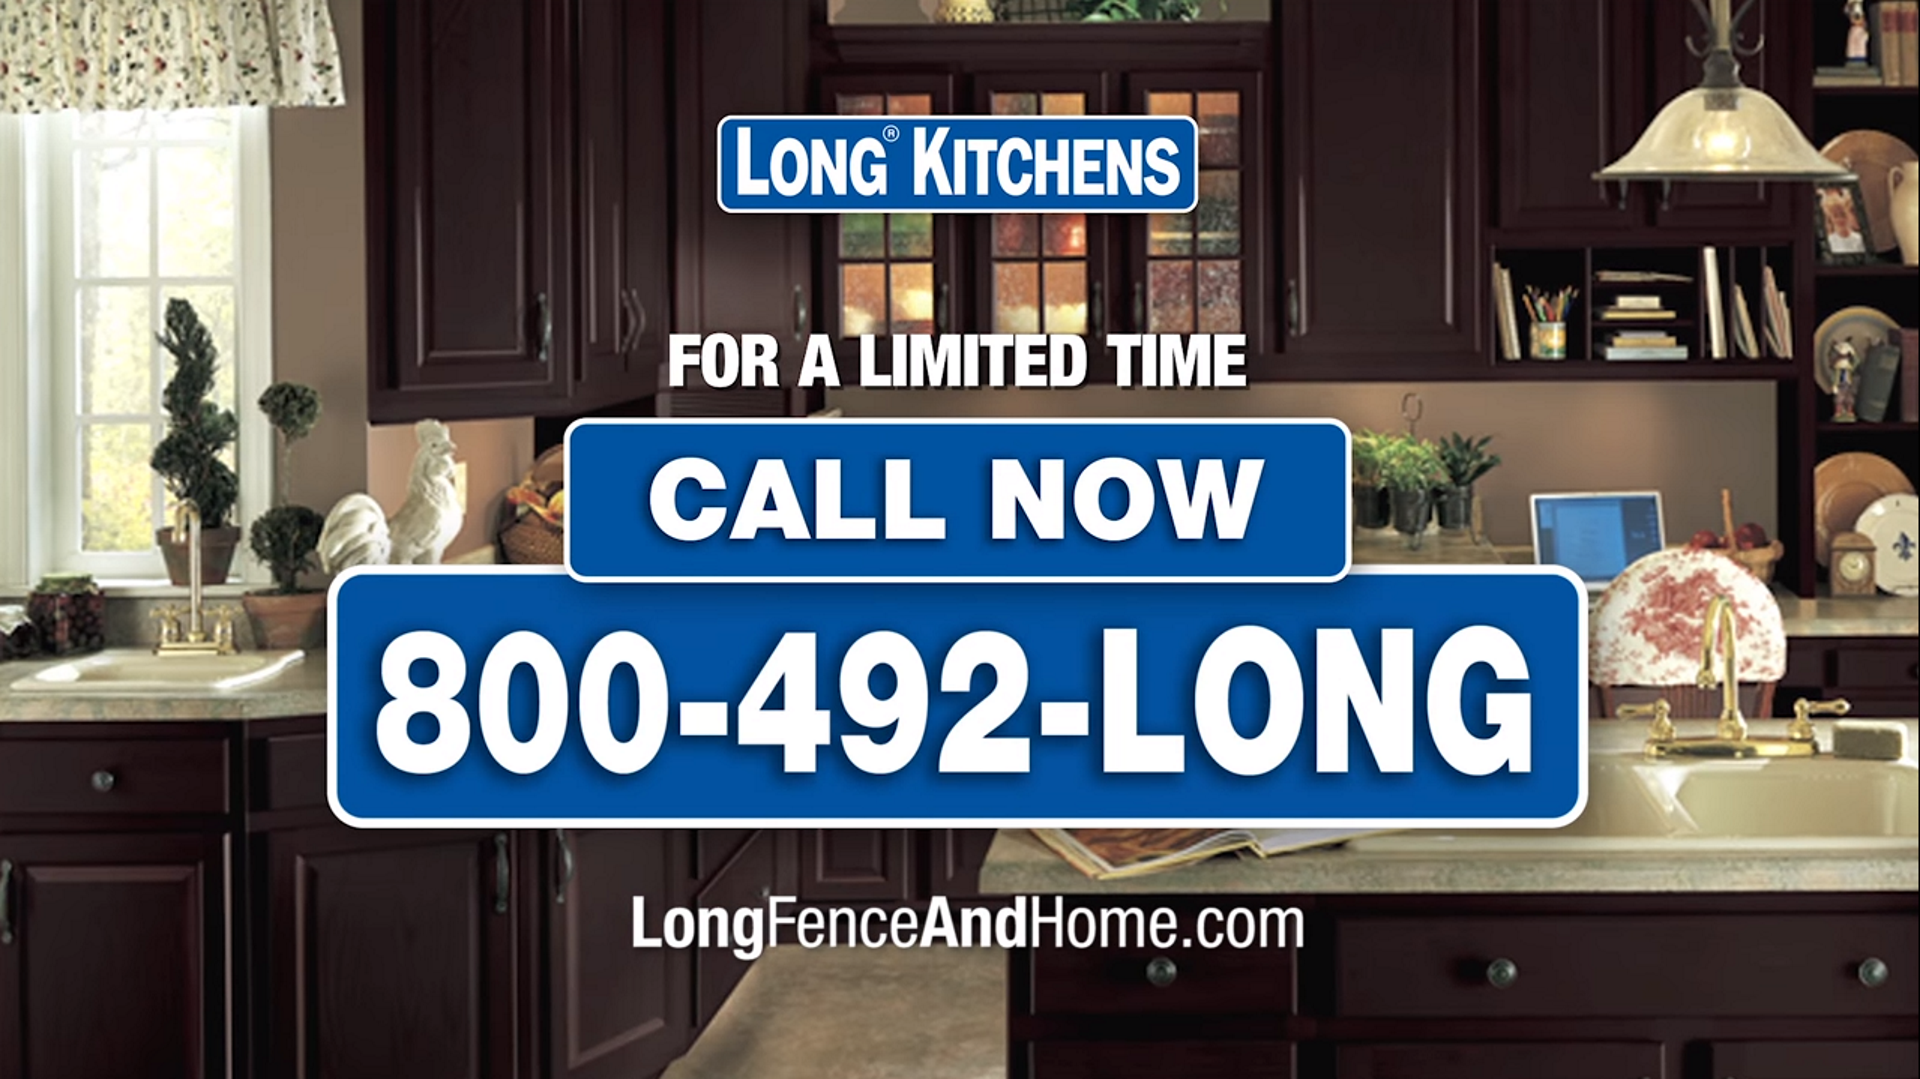 Long Kitchens Commercial Image